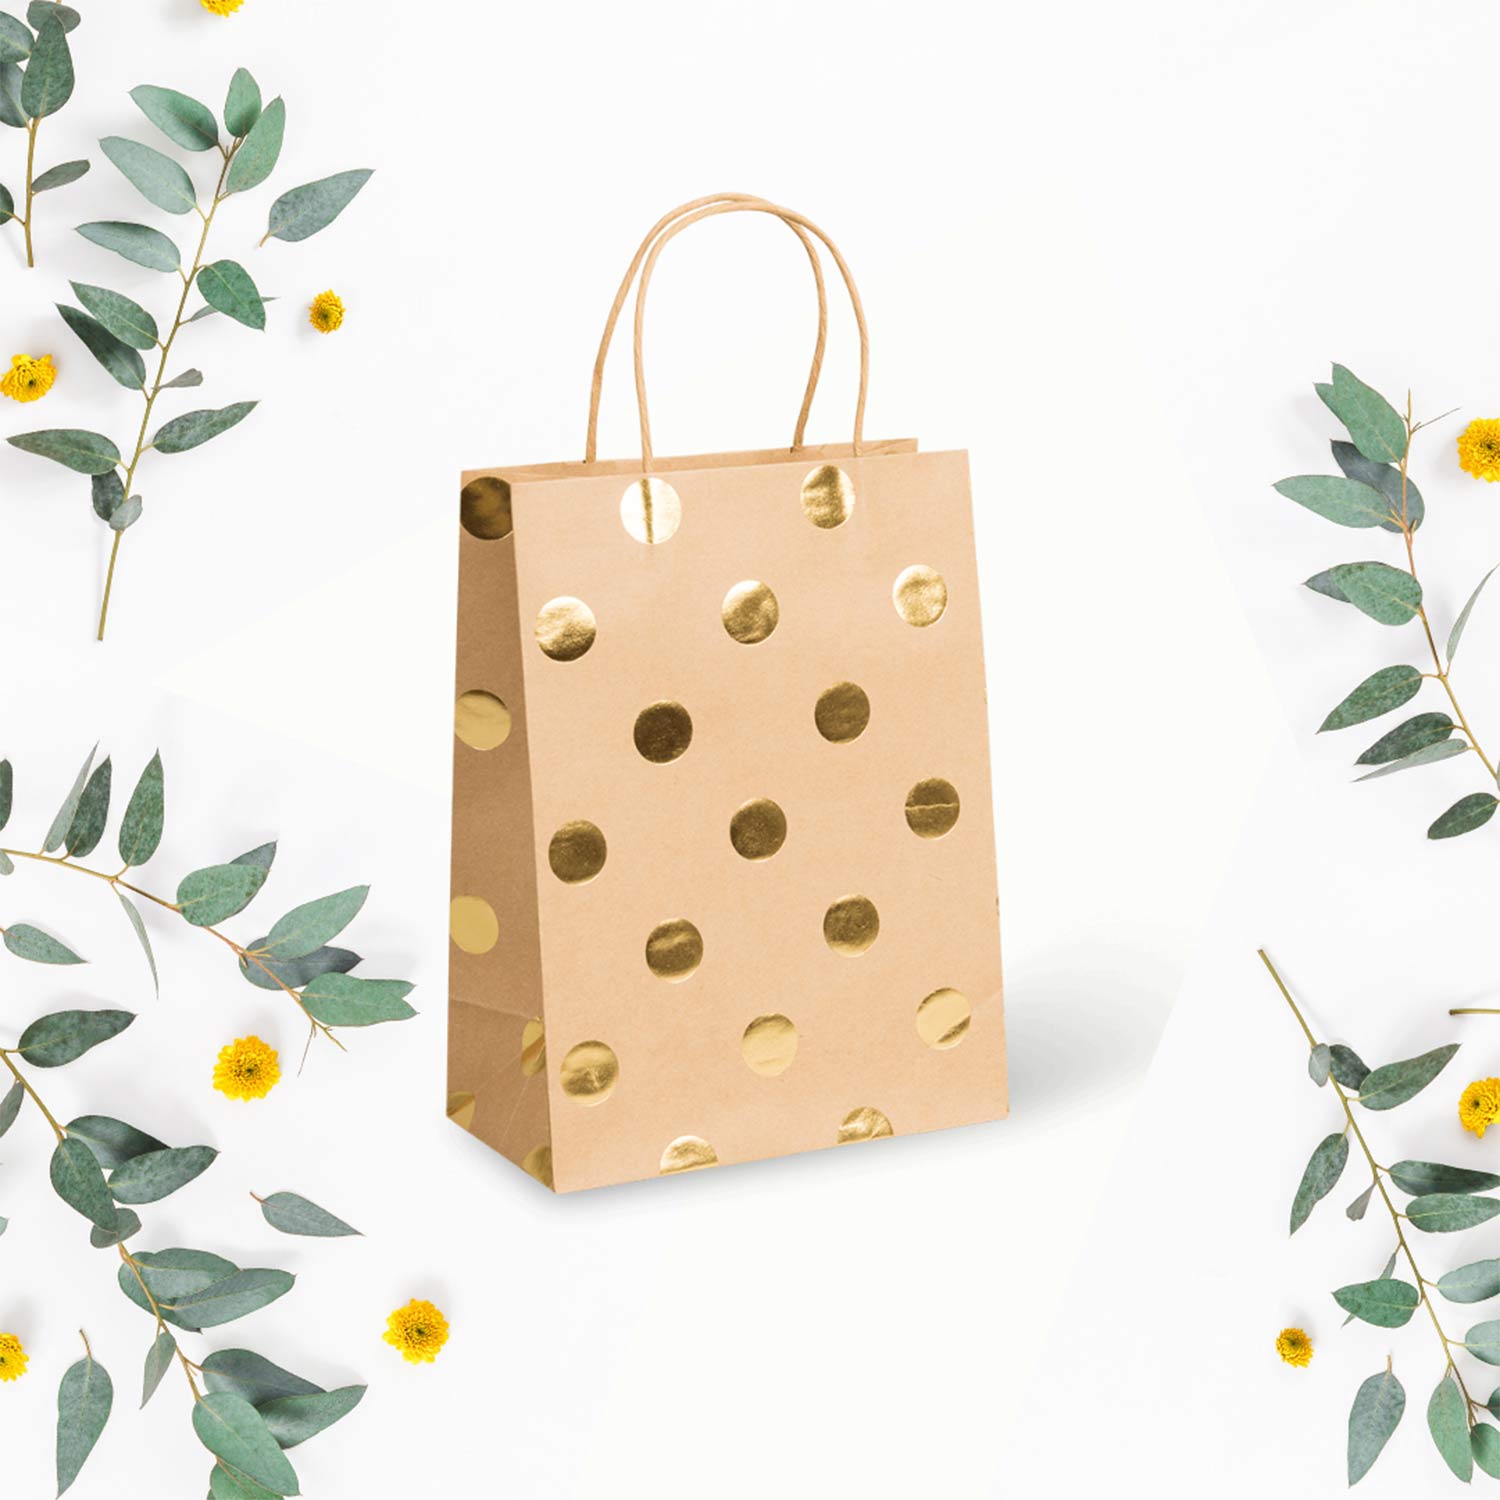 Image of the PaperPak gold spot bag - a brown kraft bag with gold spots